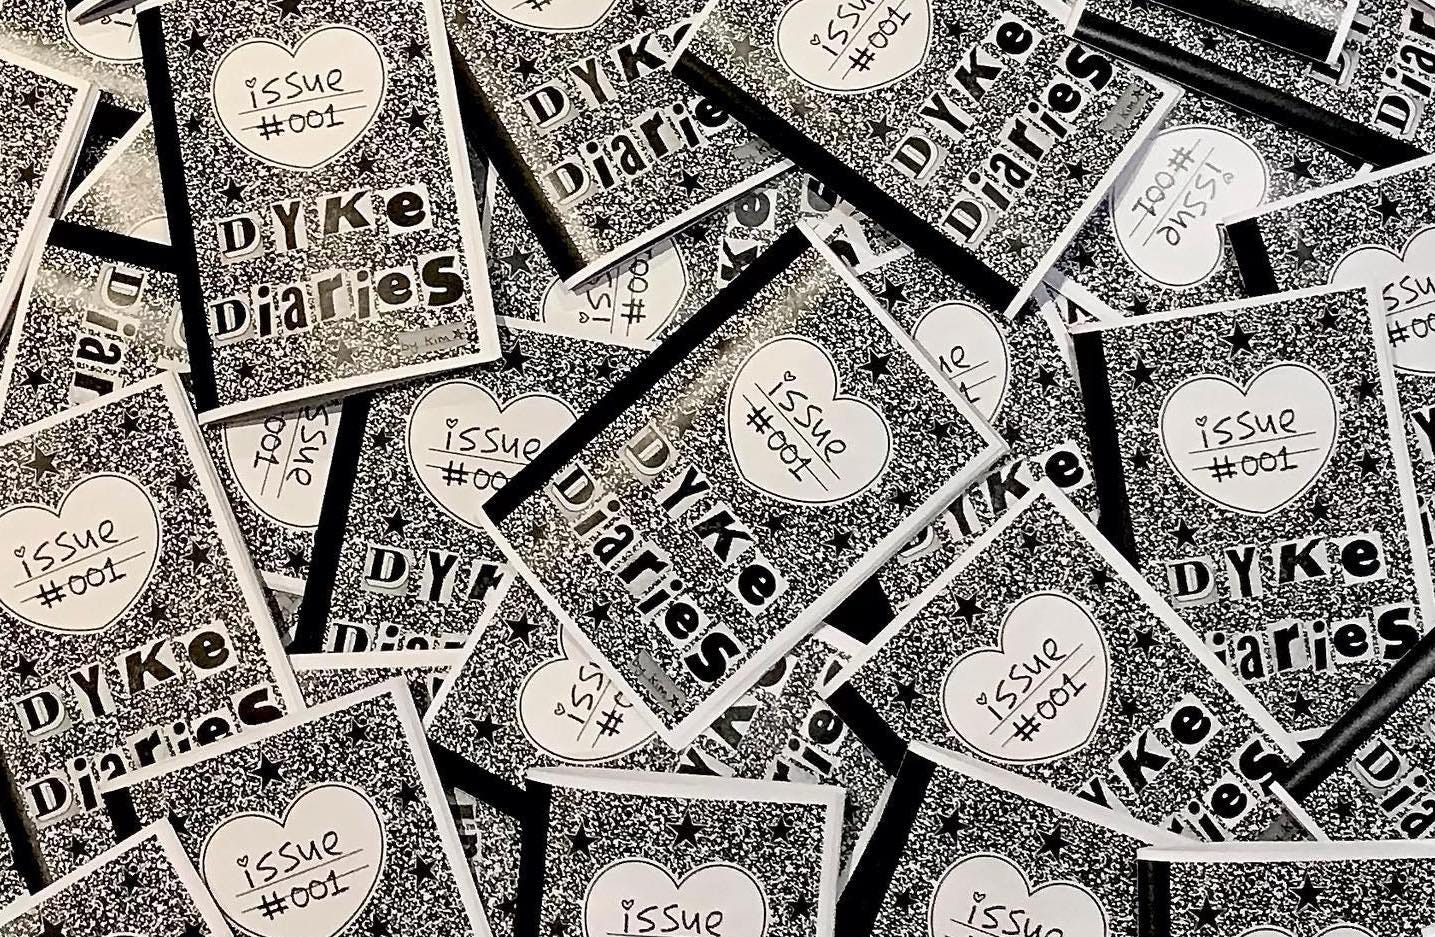 A spread-out pile of the same black-and-white zine issue fills the image. The zine cover has a white heart inside which reads 'issue #001'. Underneath is the title in cut-out letters: Dyke Diaries.